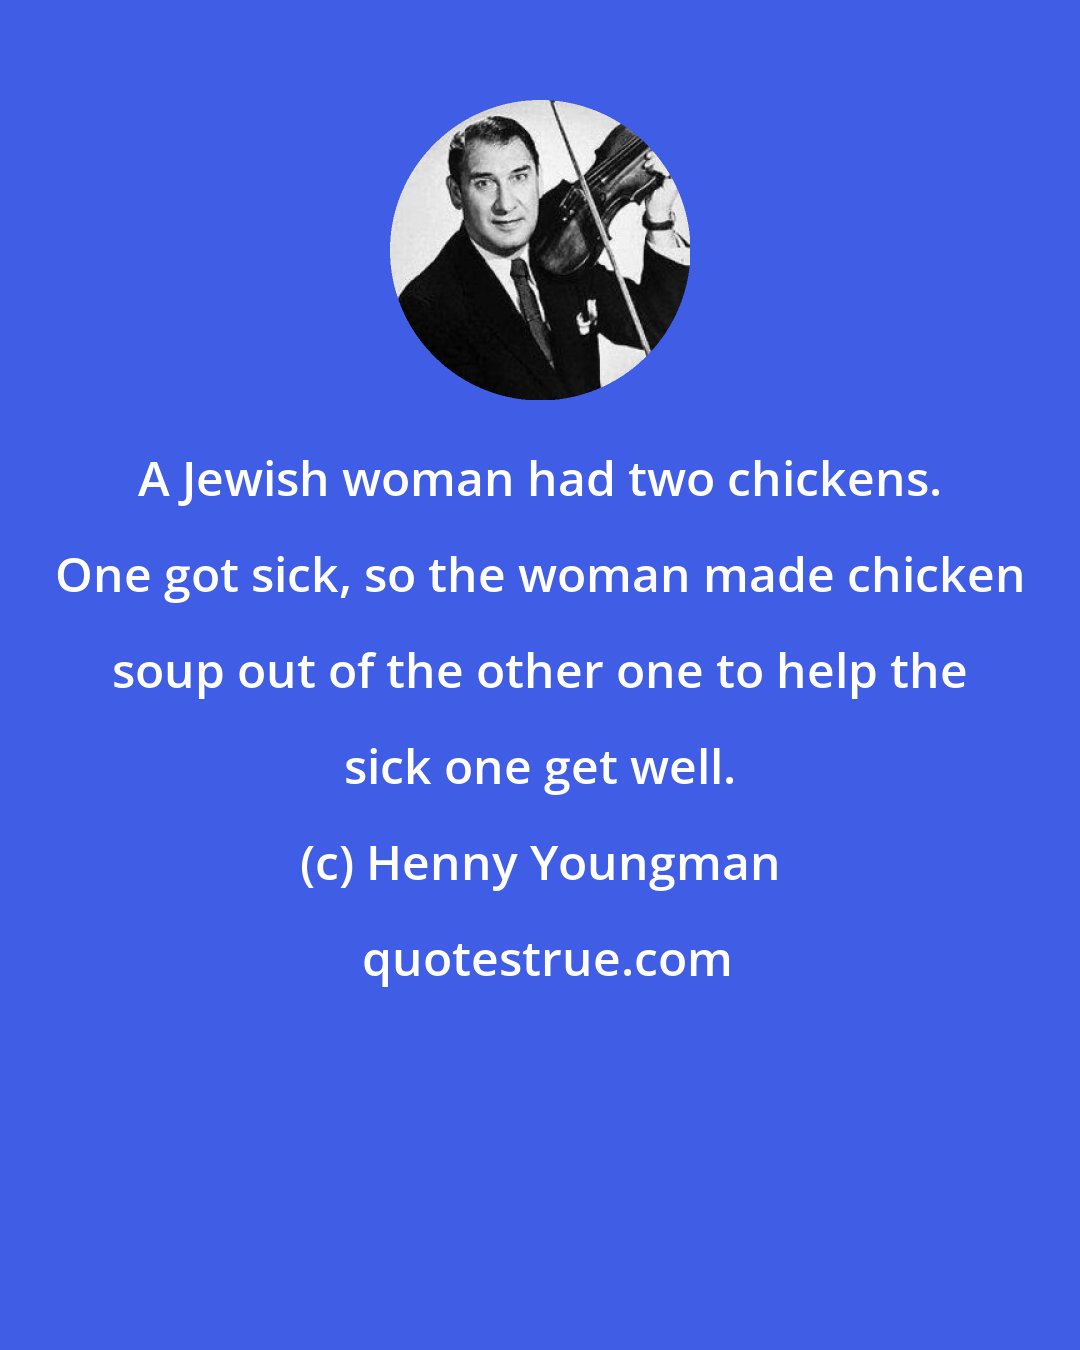 Henny Youngman: A Jewish woman had two chickens. One got sick, so the woman made chicken soup out of the other one to help the sick one get well.